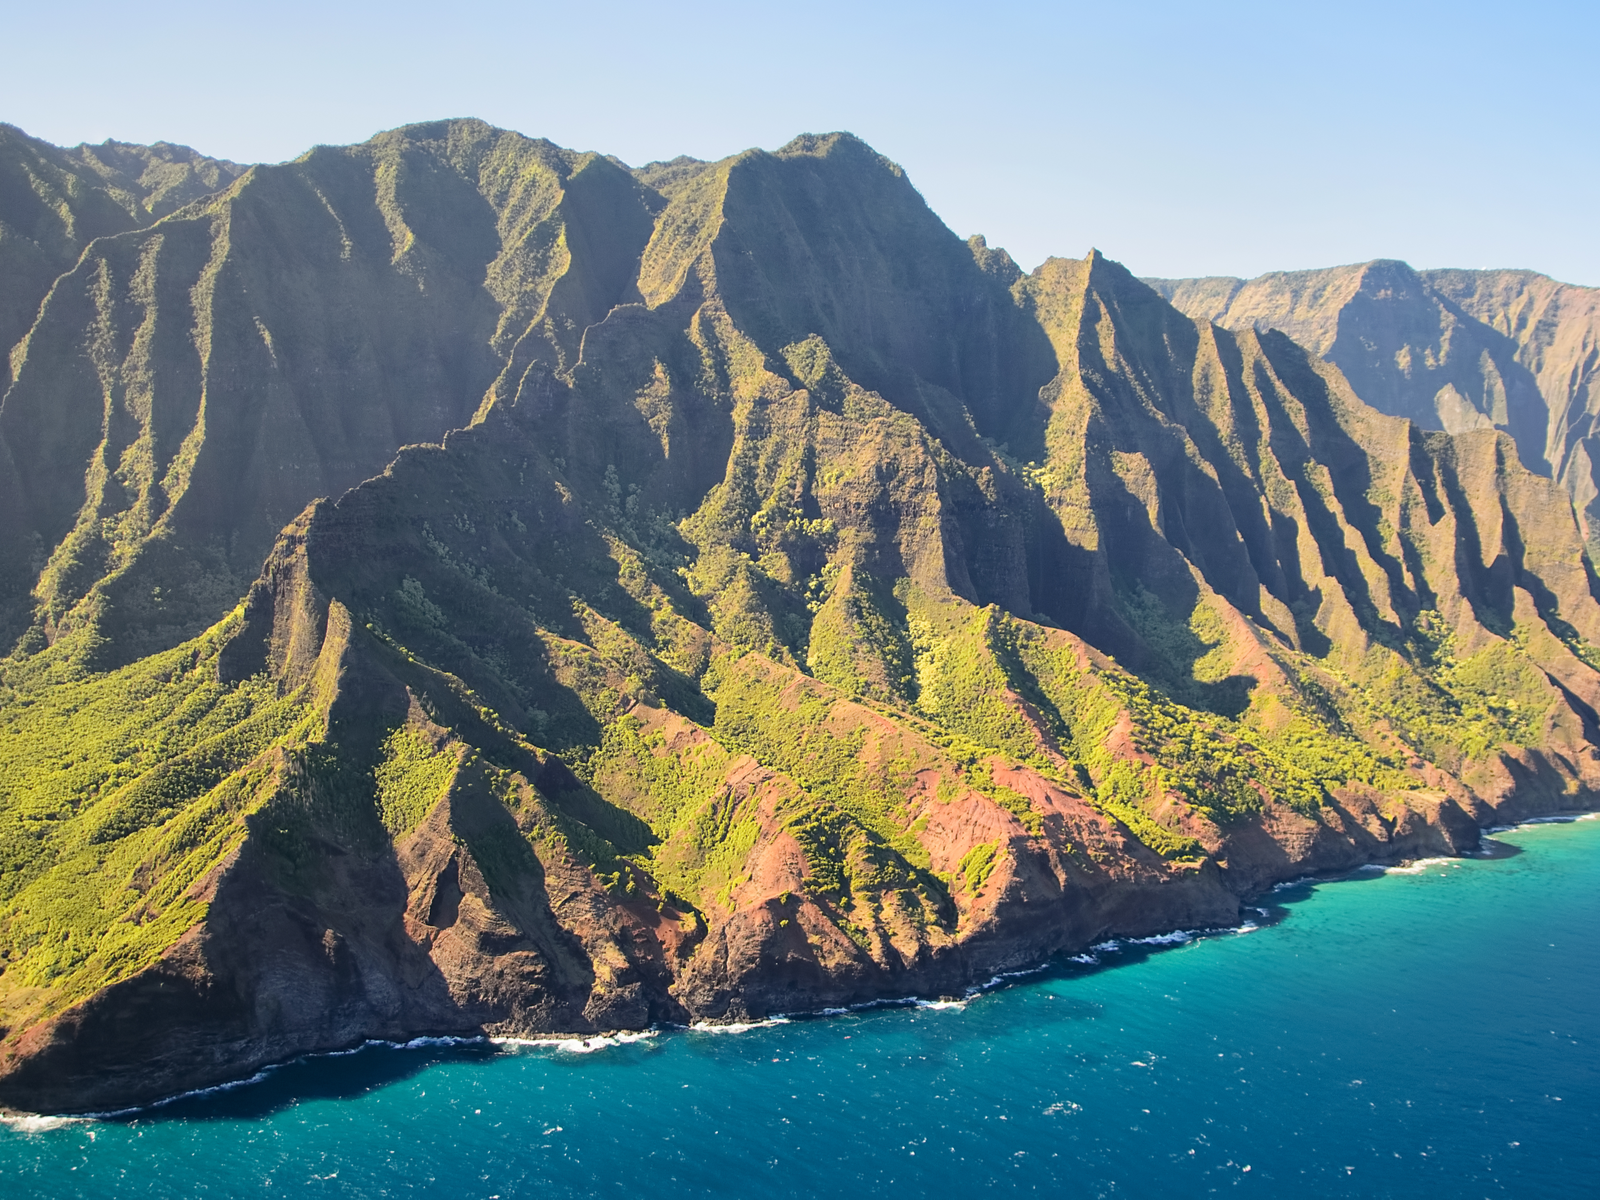 Unique land formation with patches of greeneries at Napali Coast State Wilderness Park in Hawaii, one of the most beautiful places in the US